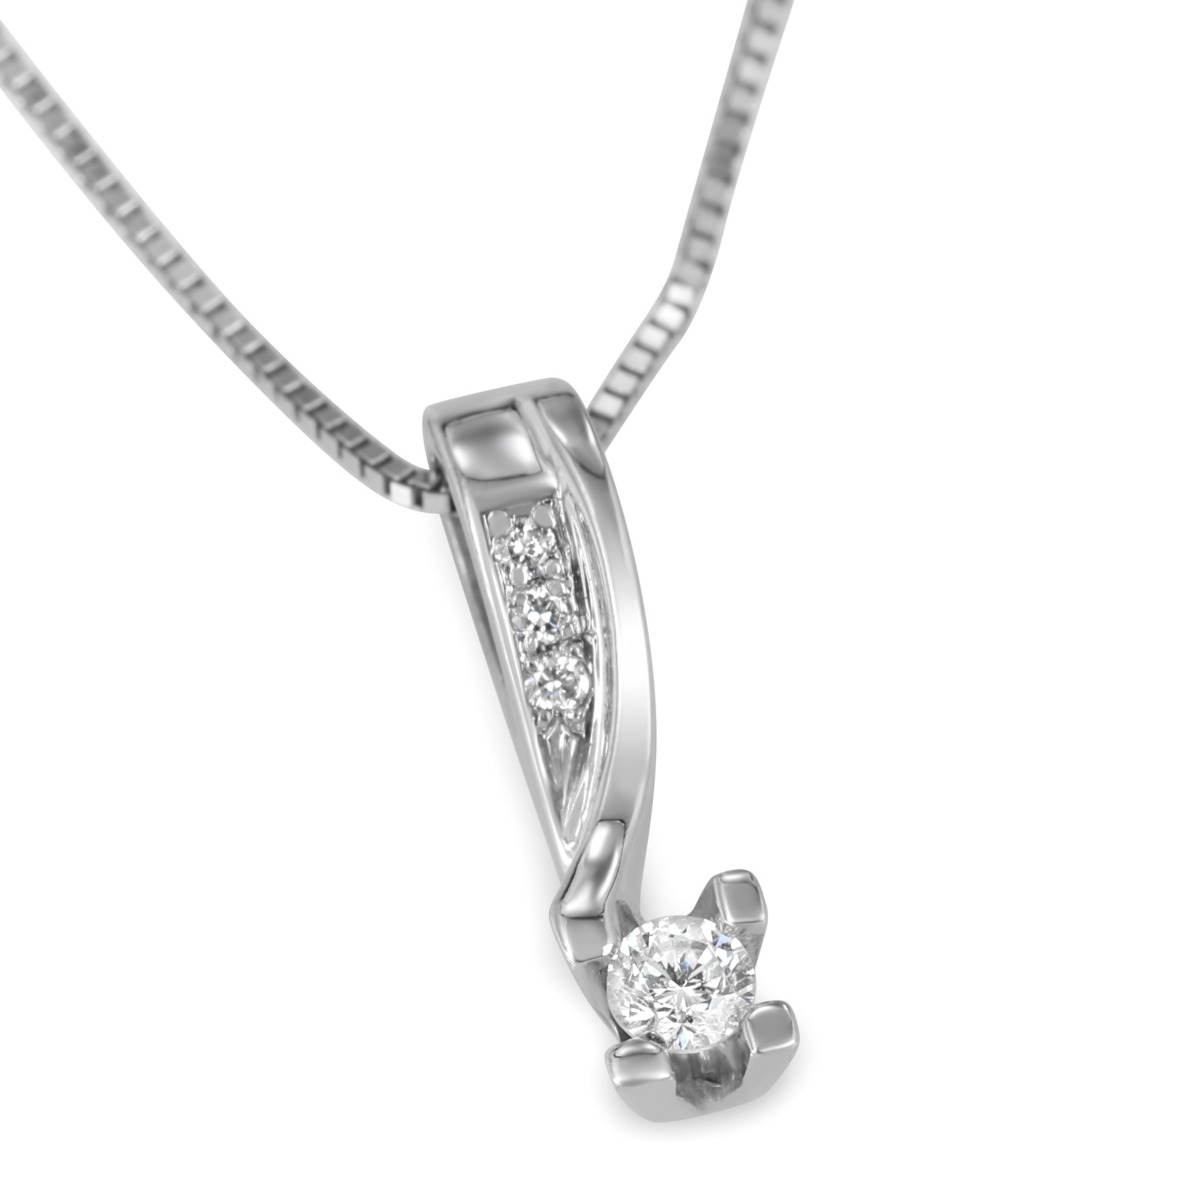 Anbinder 14K White Gold and Diamond Asymmetrical Ribbon Solitaire Pendant with Triple Diamond Accent - 1